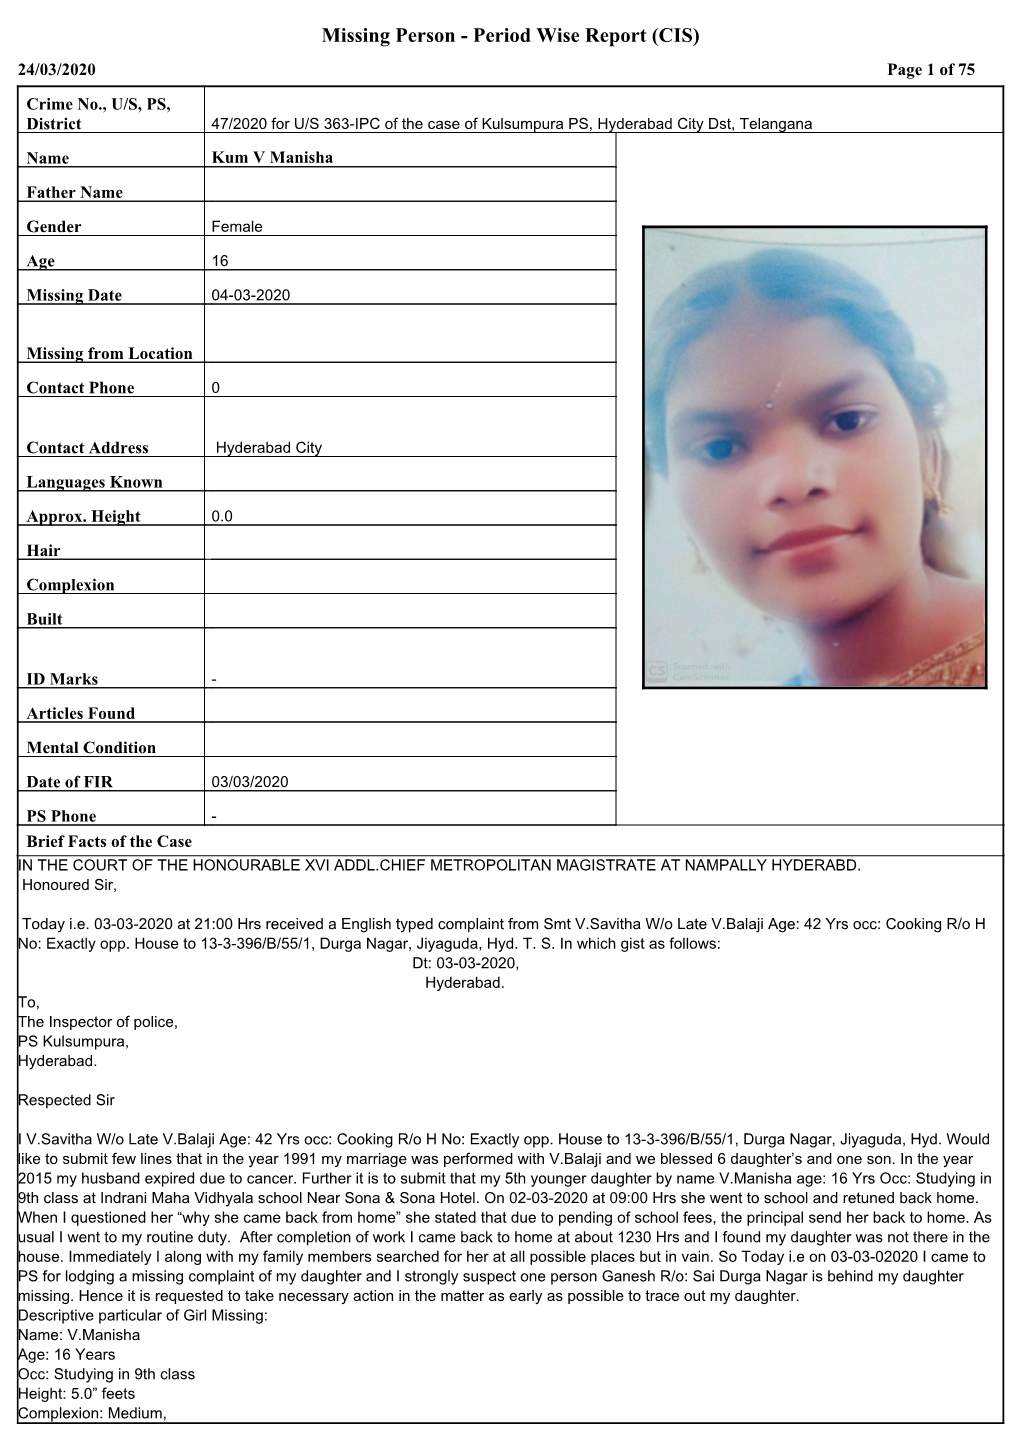 Missing Person - Period Wise Report (CIS) 24/03/2020 Page 1 of 75